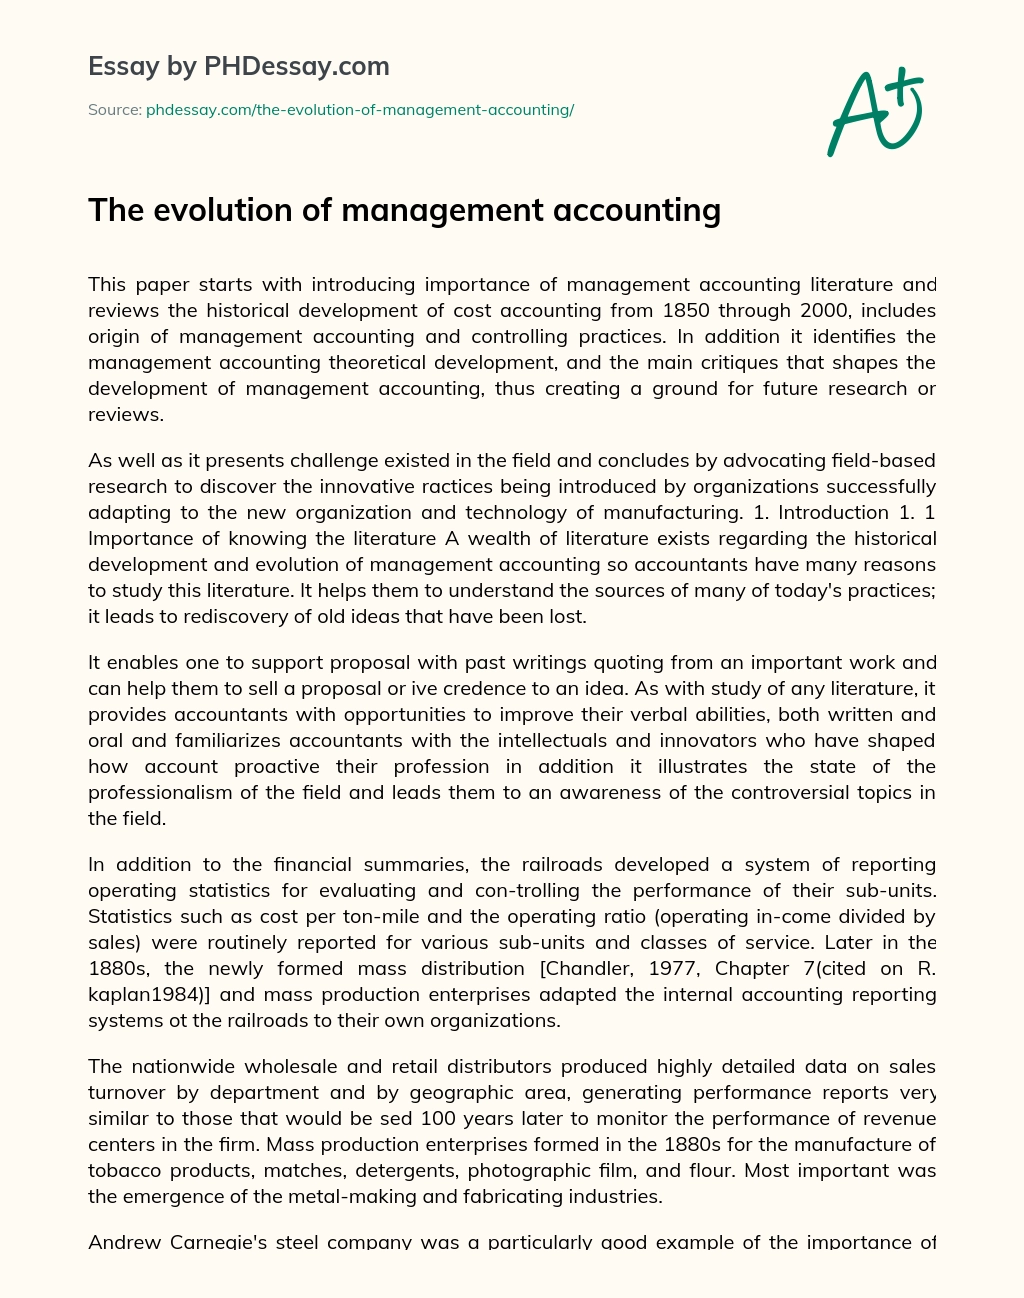 The evolution of management accounting essay